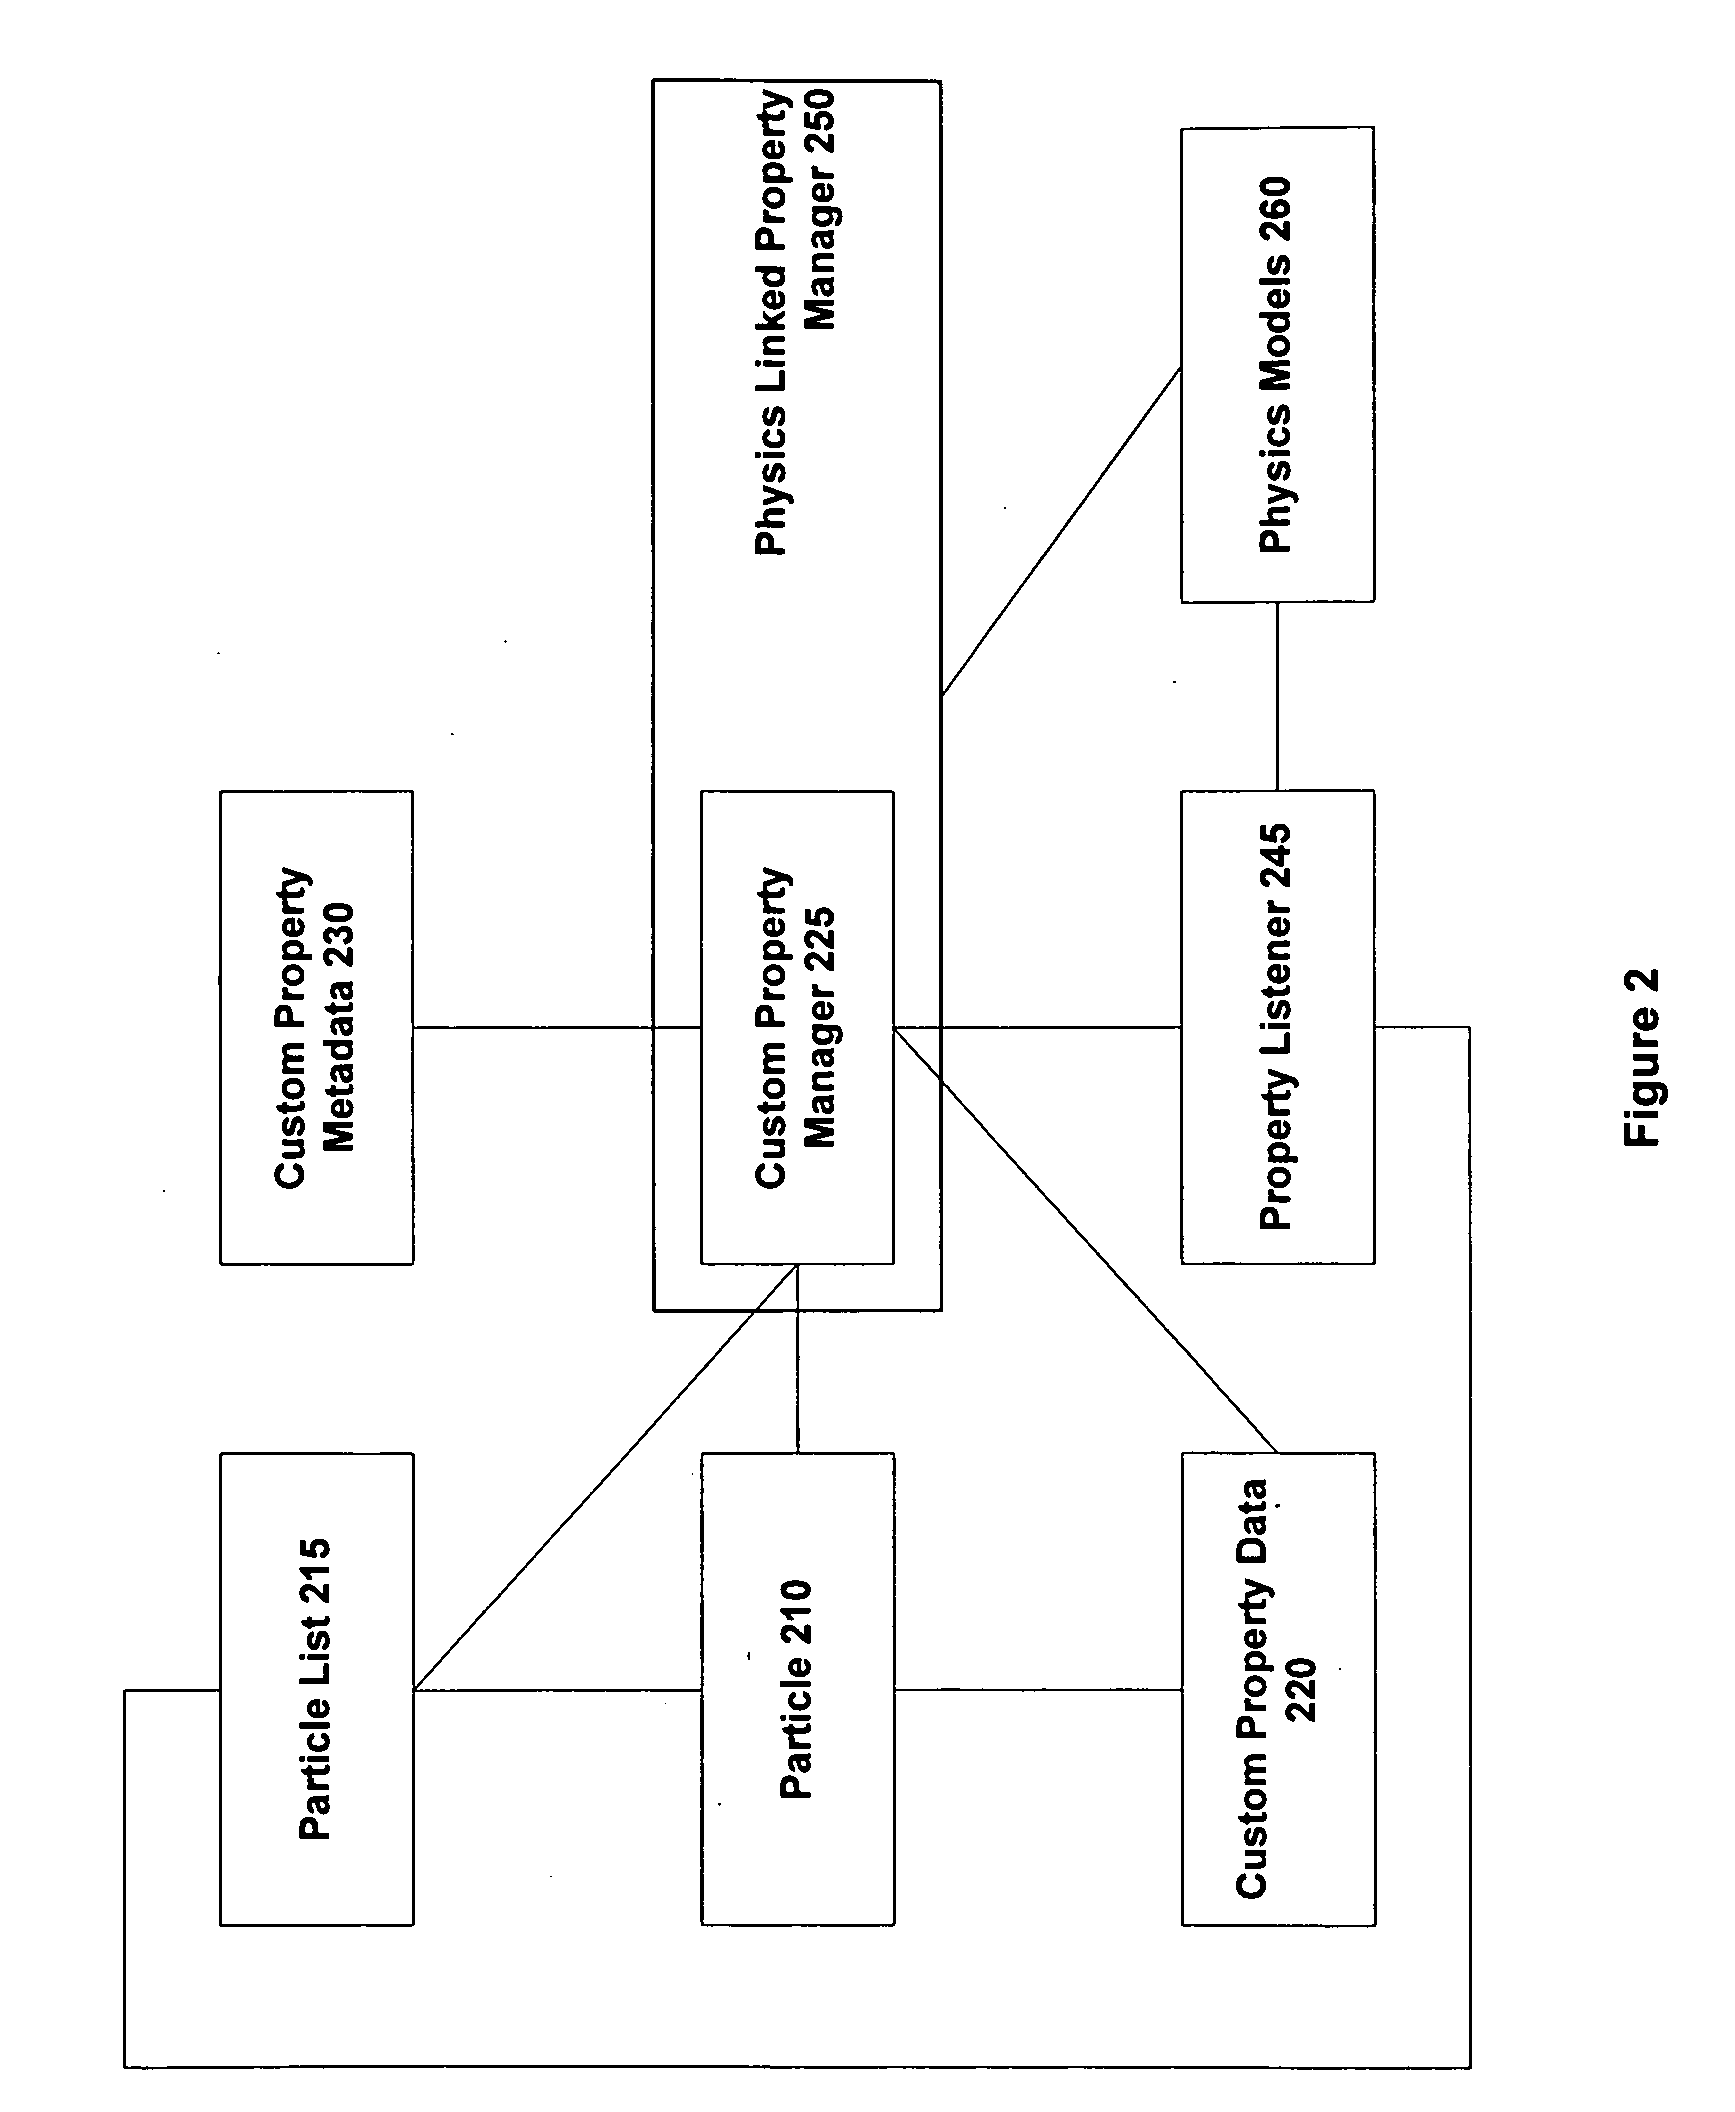 Method and apparatus for simulation by discrete element modeling and supporting customisable particle properties